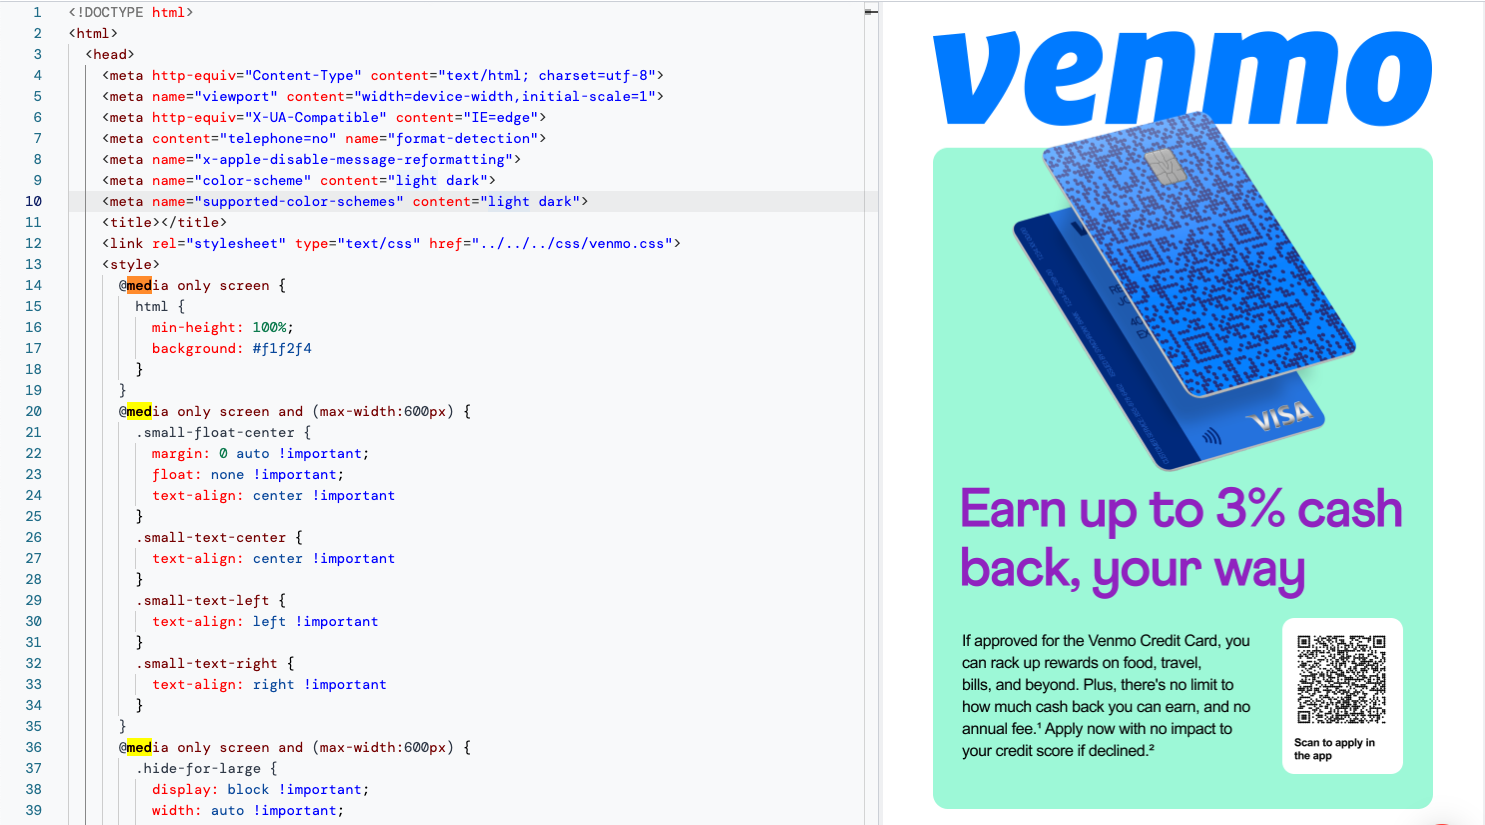 Example of media queries in an email from Venmo. Screenshot pulled from ReallyGoodEmails powered by Parcel.